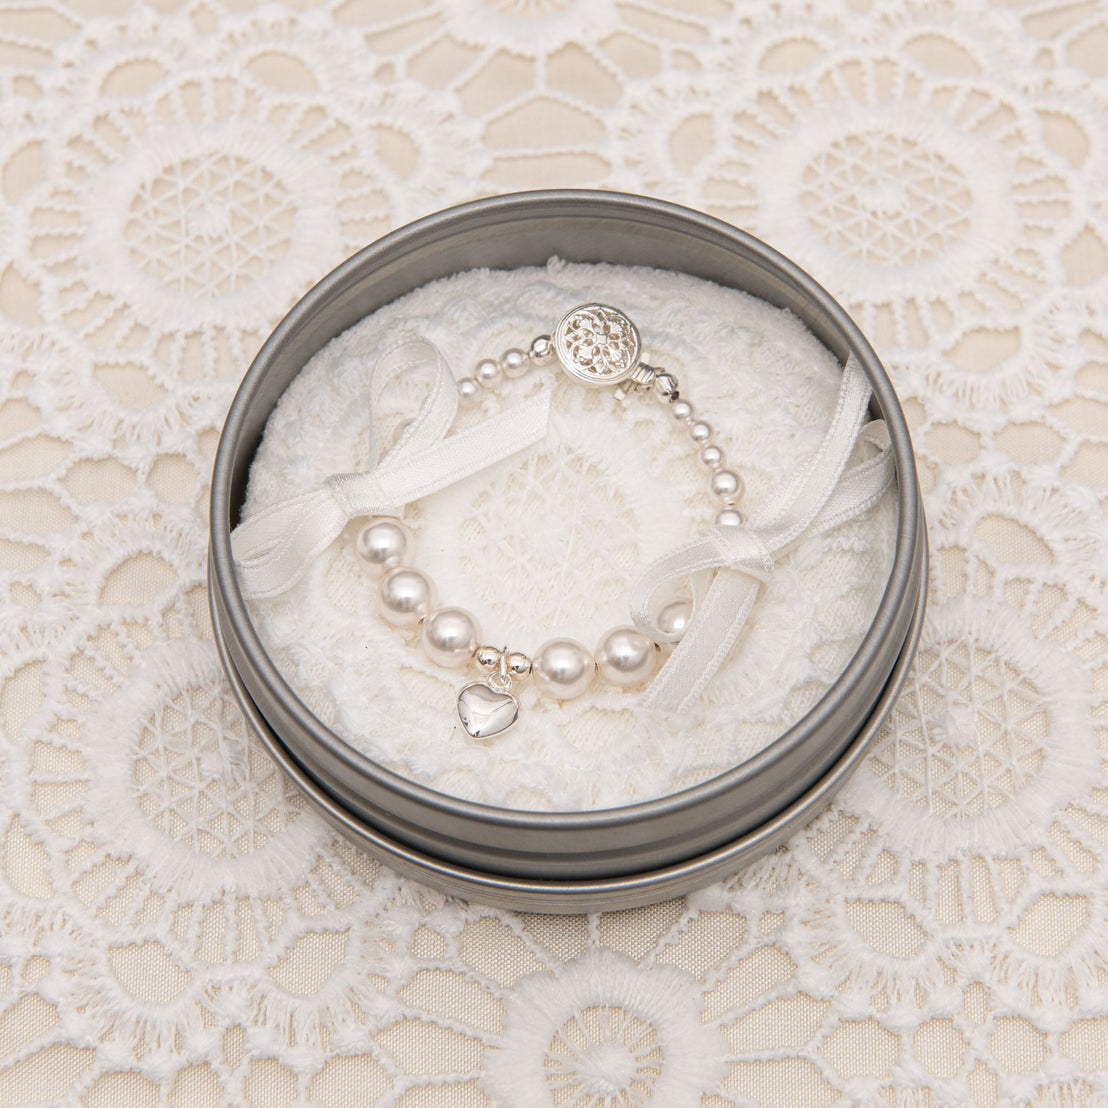 Baby jewelry: White luster pearl bracelet photographed in packaging. 